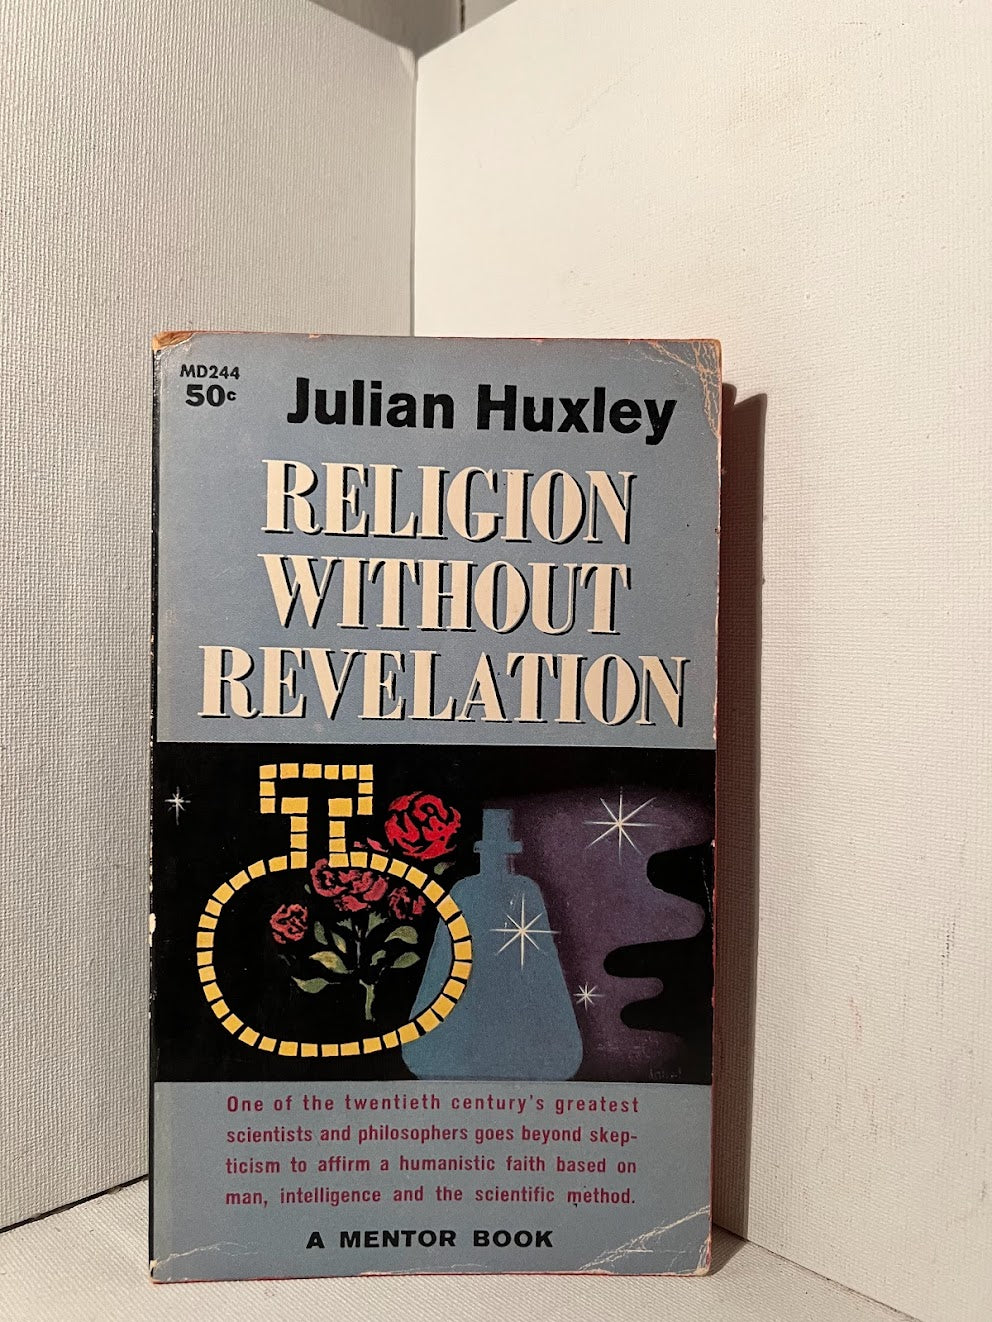 Religion Without Revelation by Julian Huxley